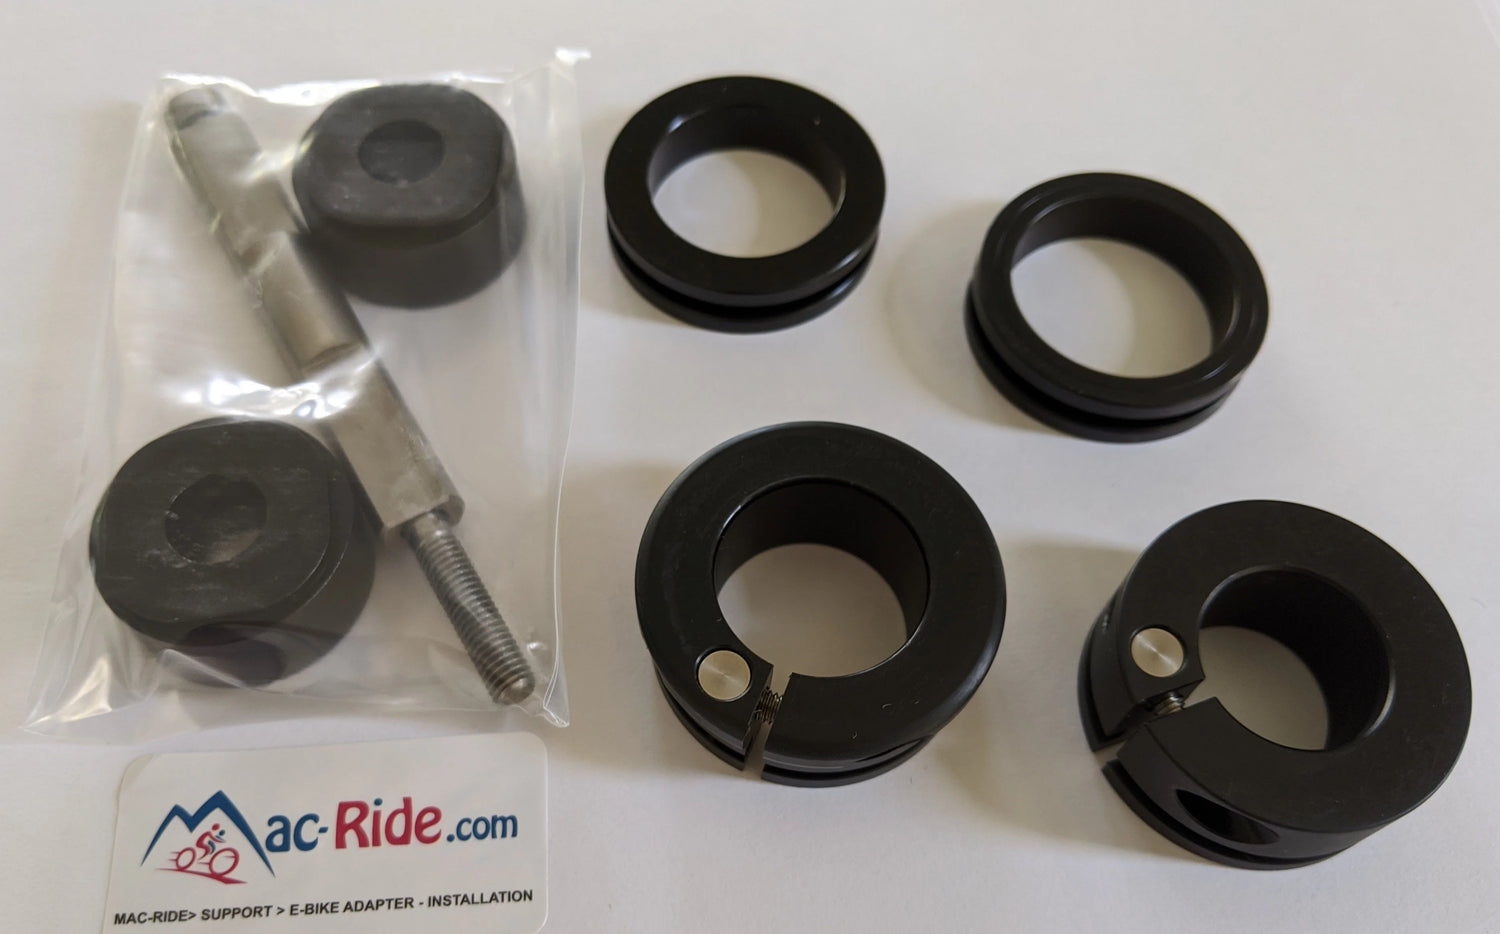 E-Bike Adapters and Front Mount Spacers